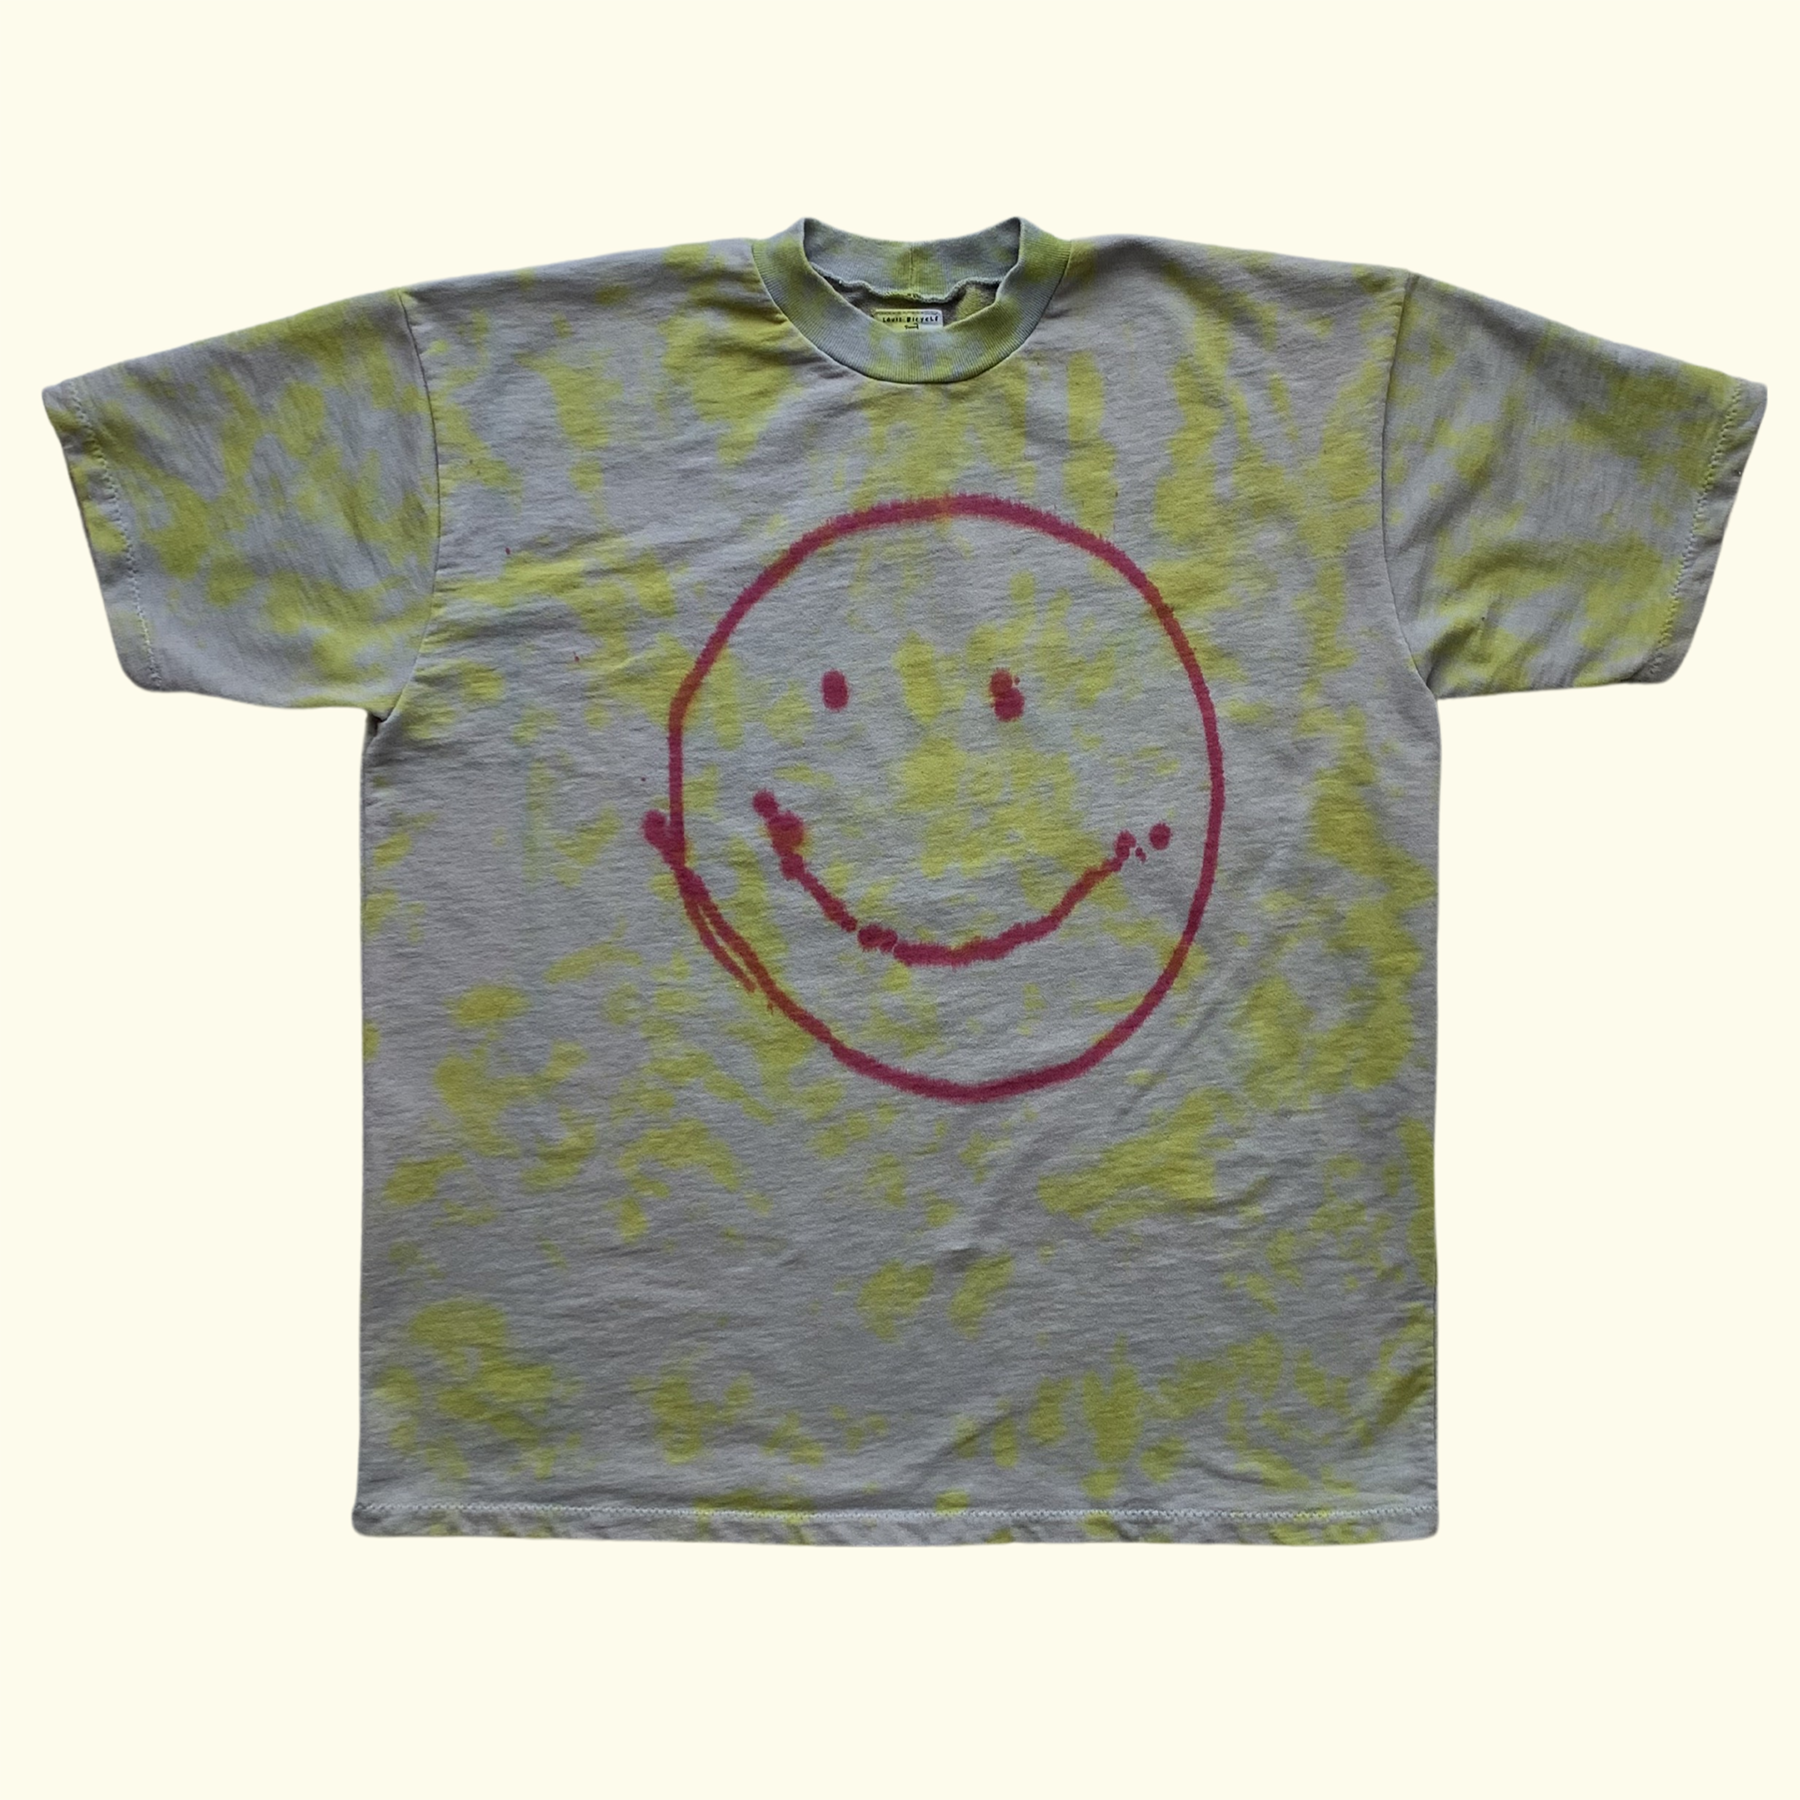 french terry heavy tee - organic usa cotton - garment dyed and dye painted - XL